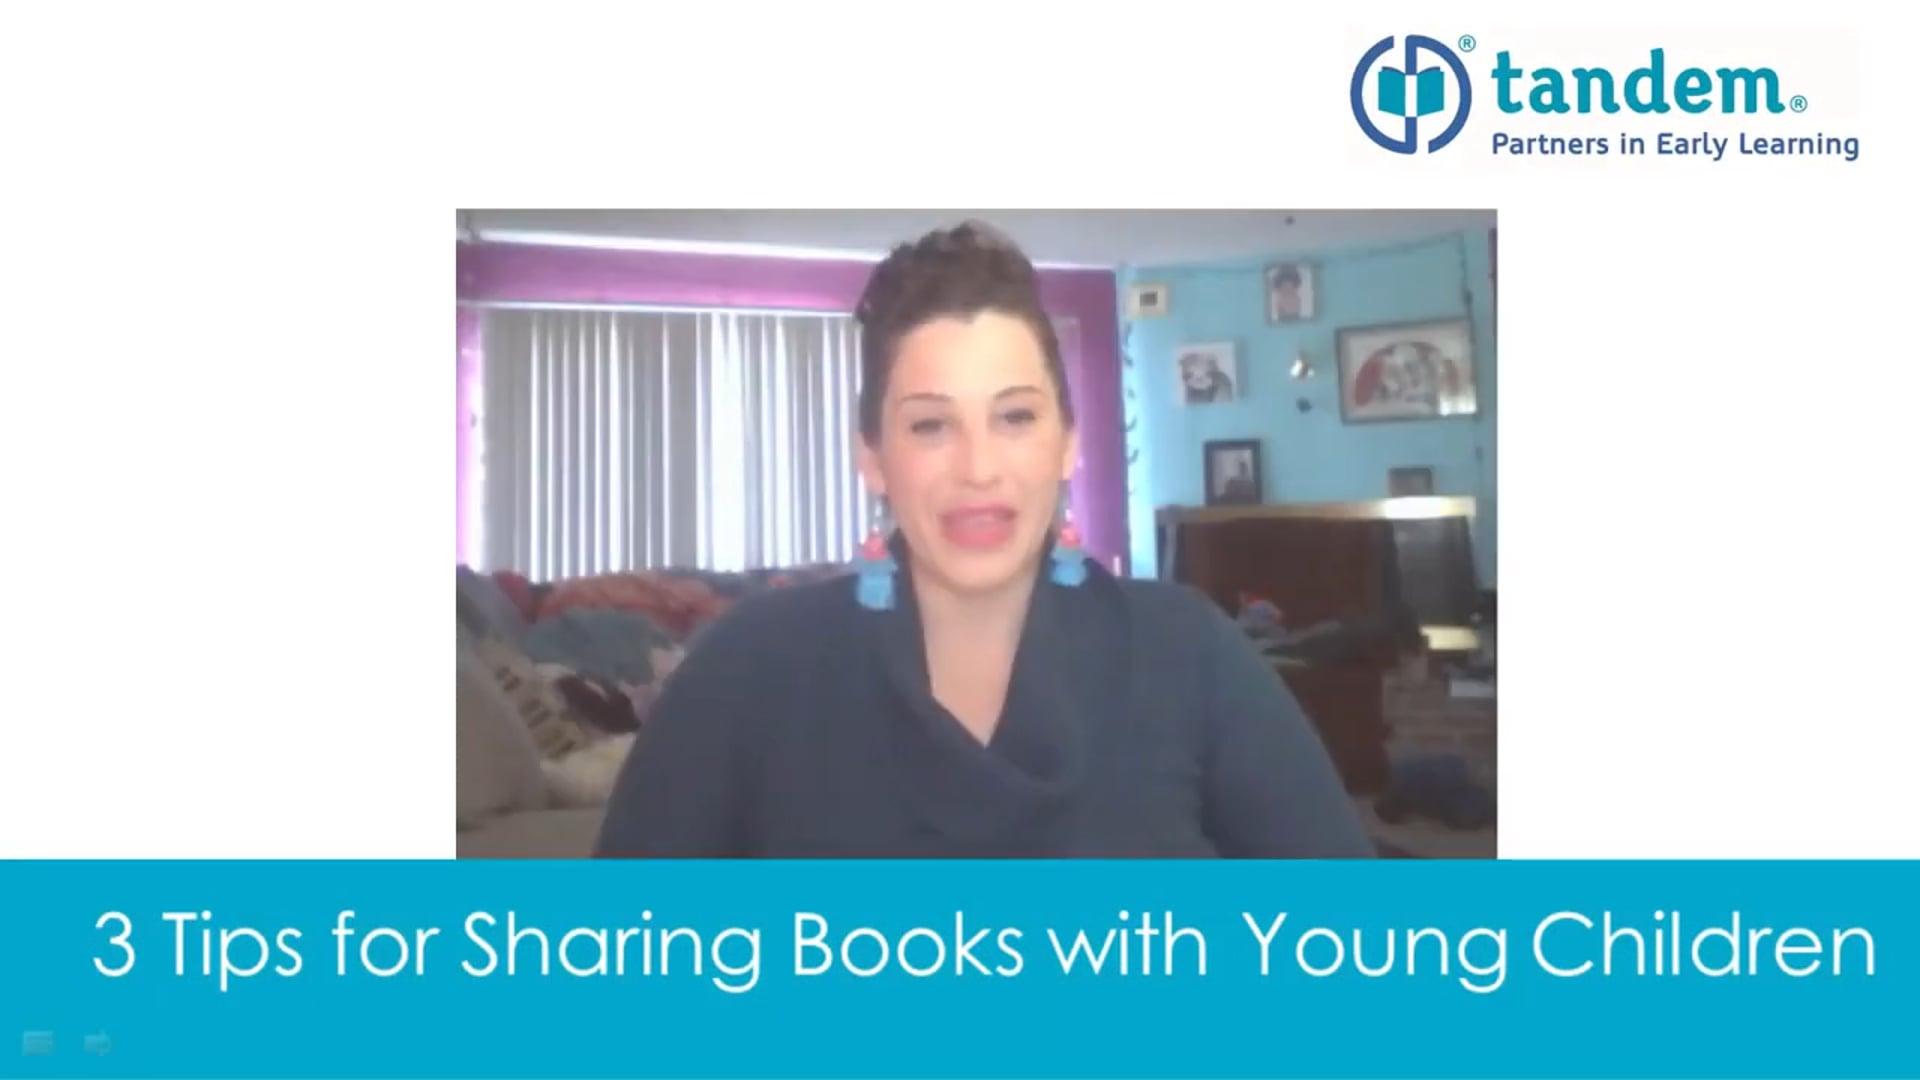 Tandem's 3 Tips for Sharing Books with Young Children